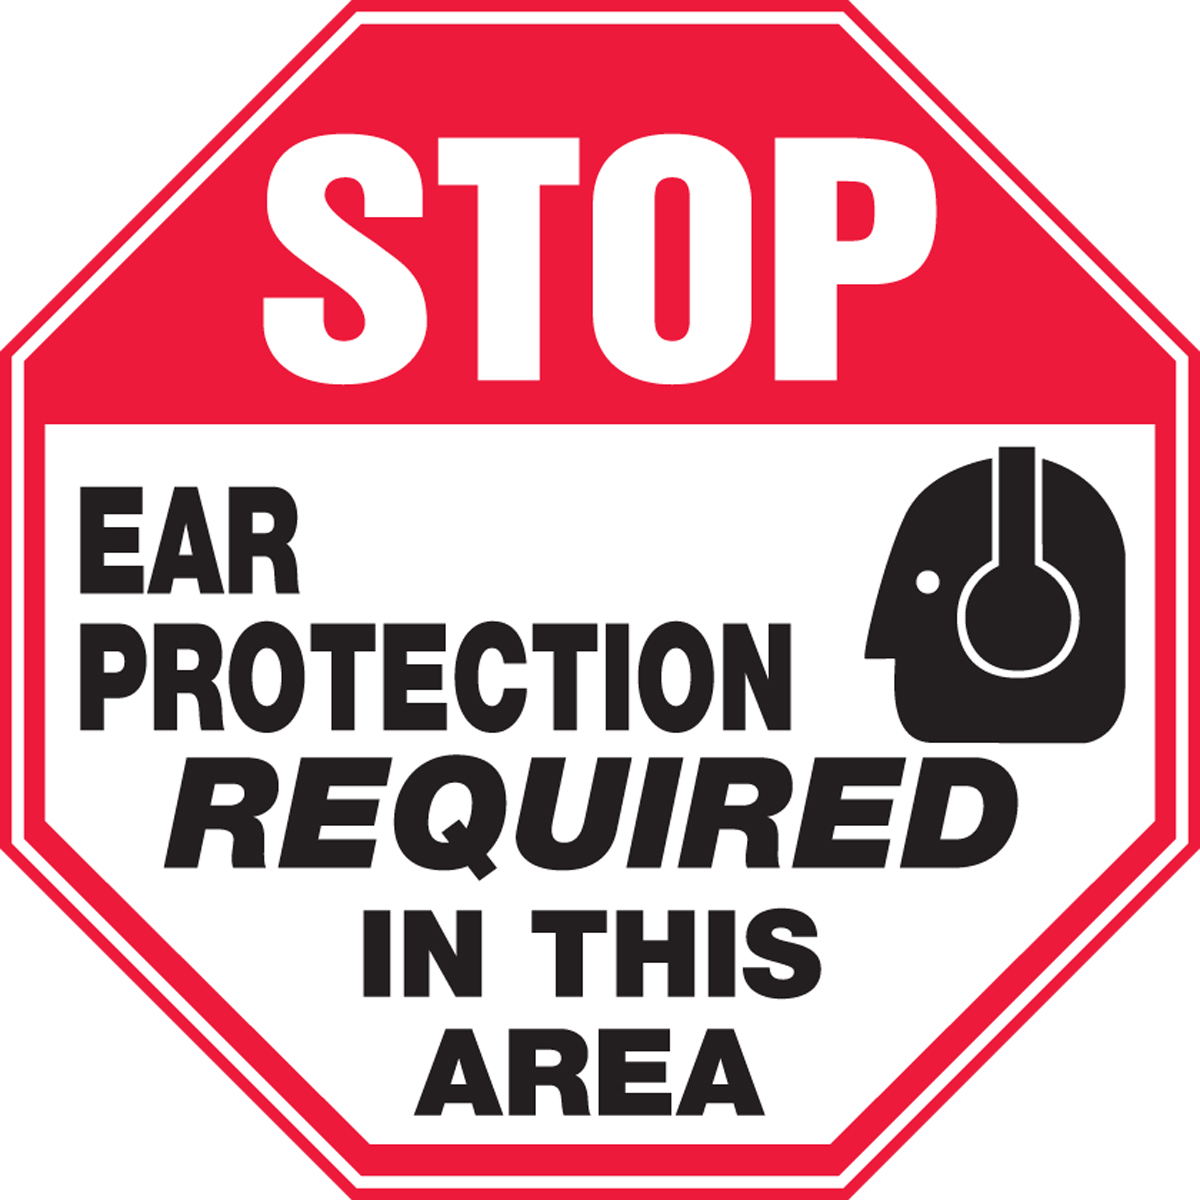 STOP EAR PROTECTION REQUIRED IN THIS AREA (W/GRAPHIC)